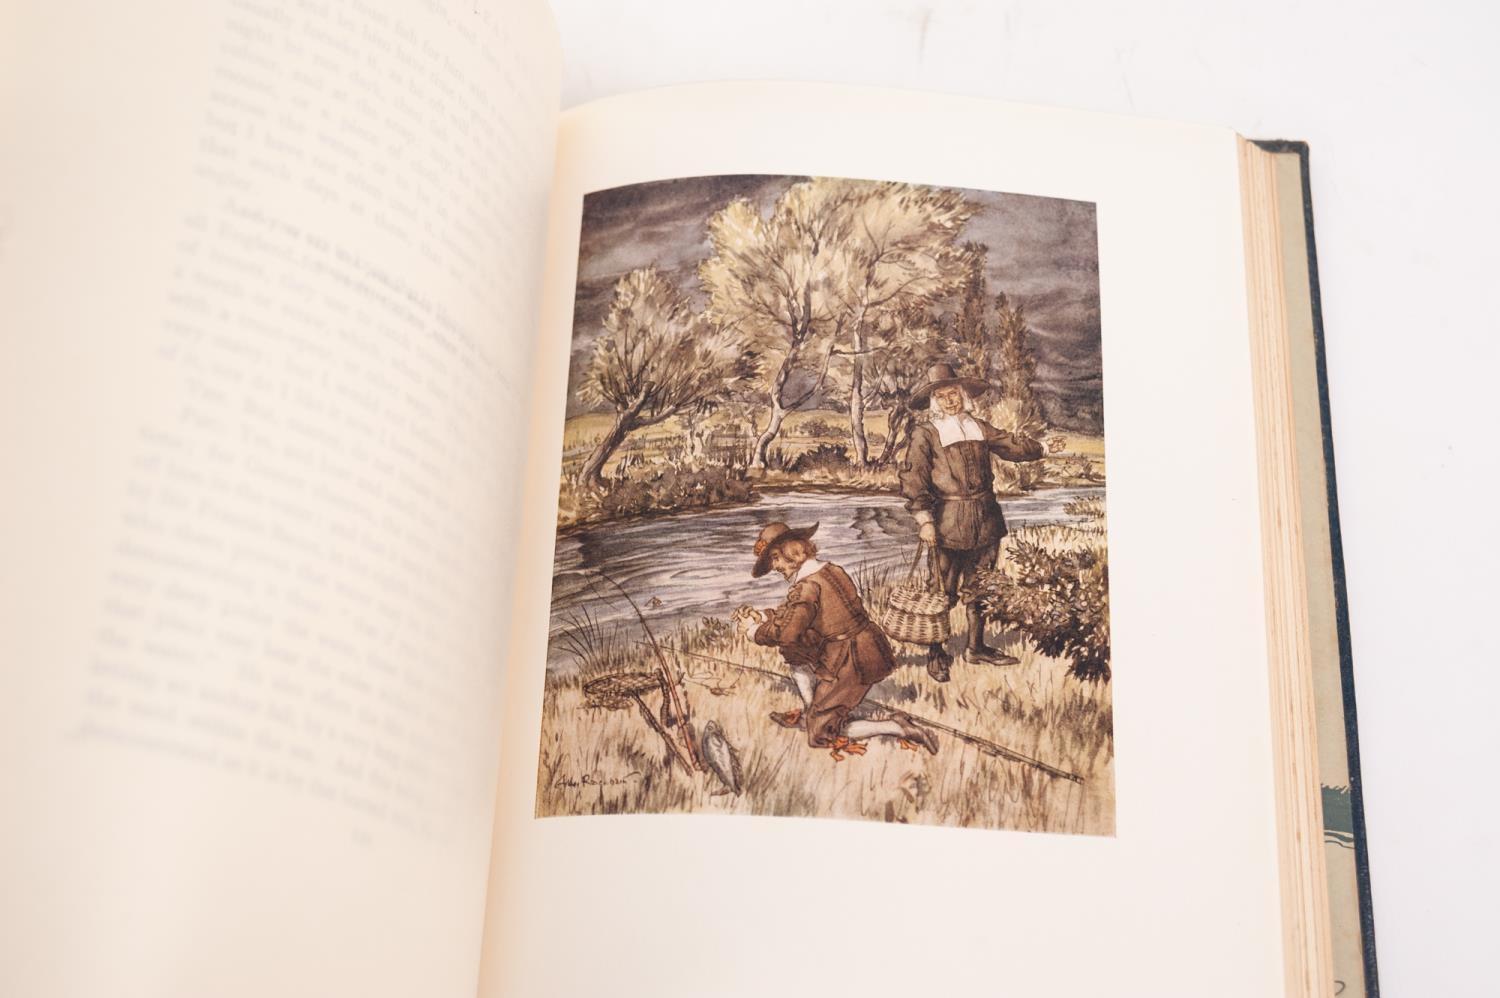 IZAAK WALTON - THE COMPLEAT ANGLER, illustrated by Arthur Rackham, 1931 1st Ed thus This the - Image 6 of 6